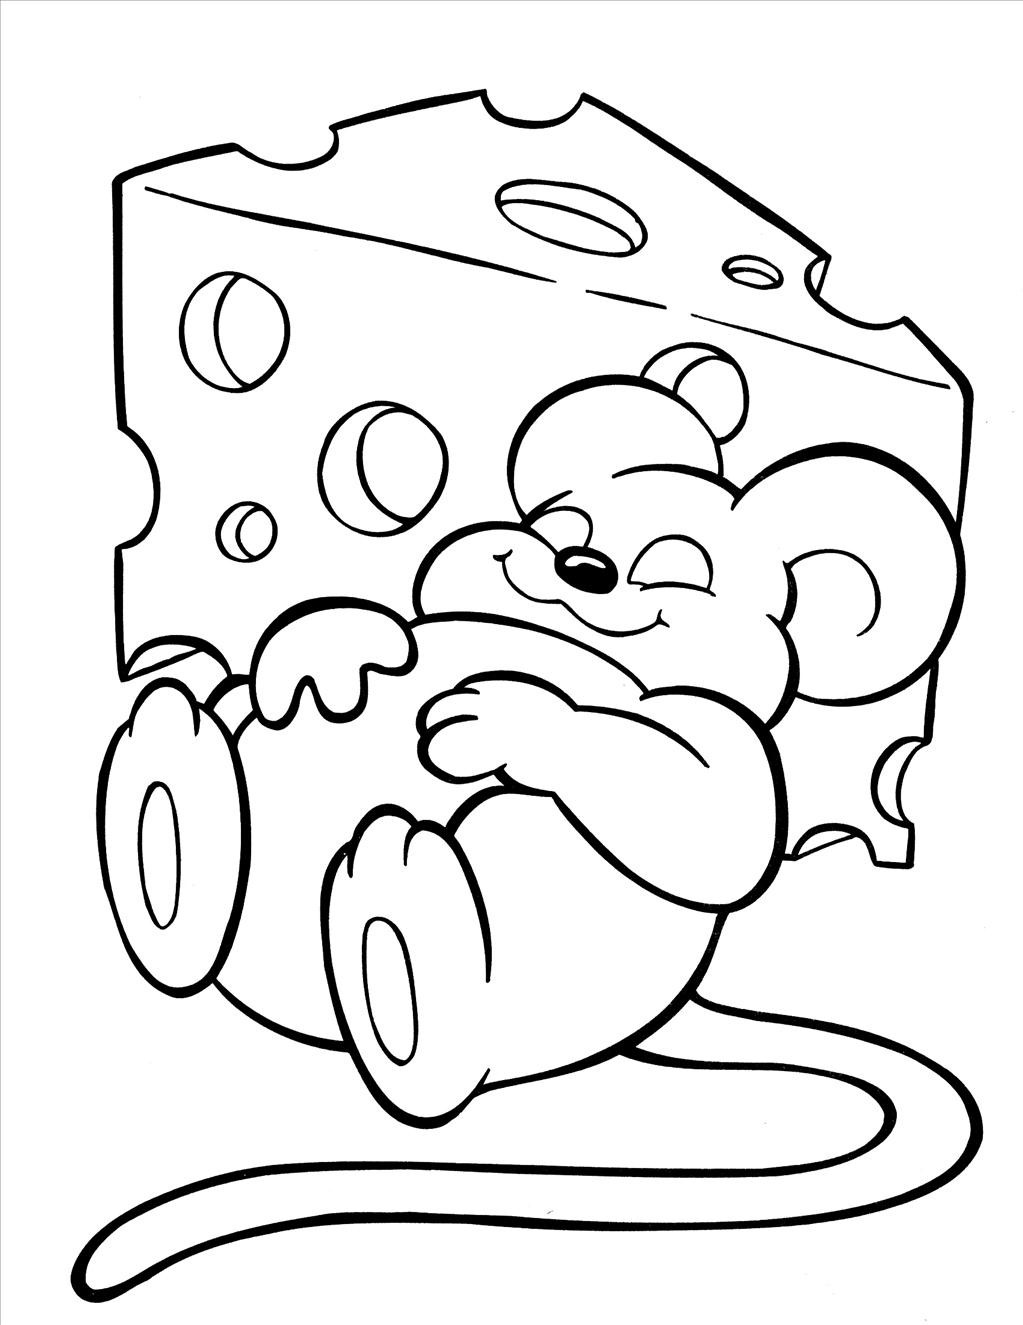 Giant Coloring Pages at GetColorings.com | Free printable colorings